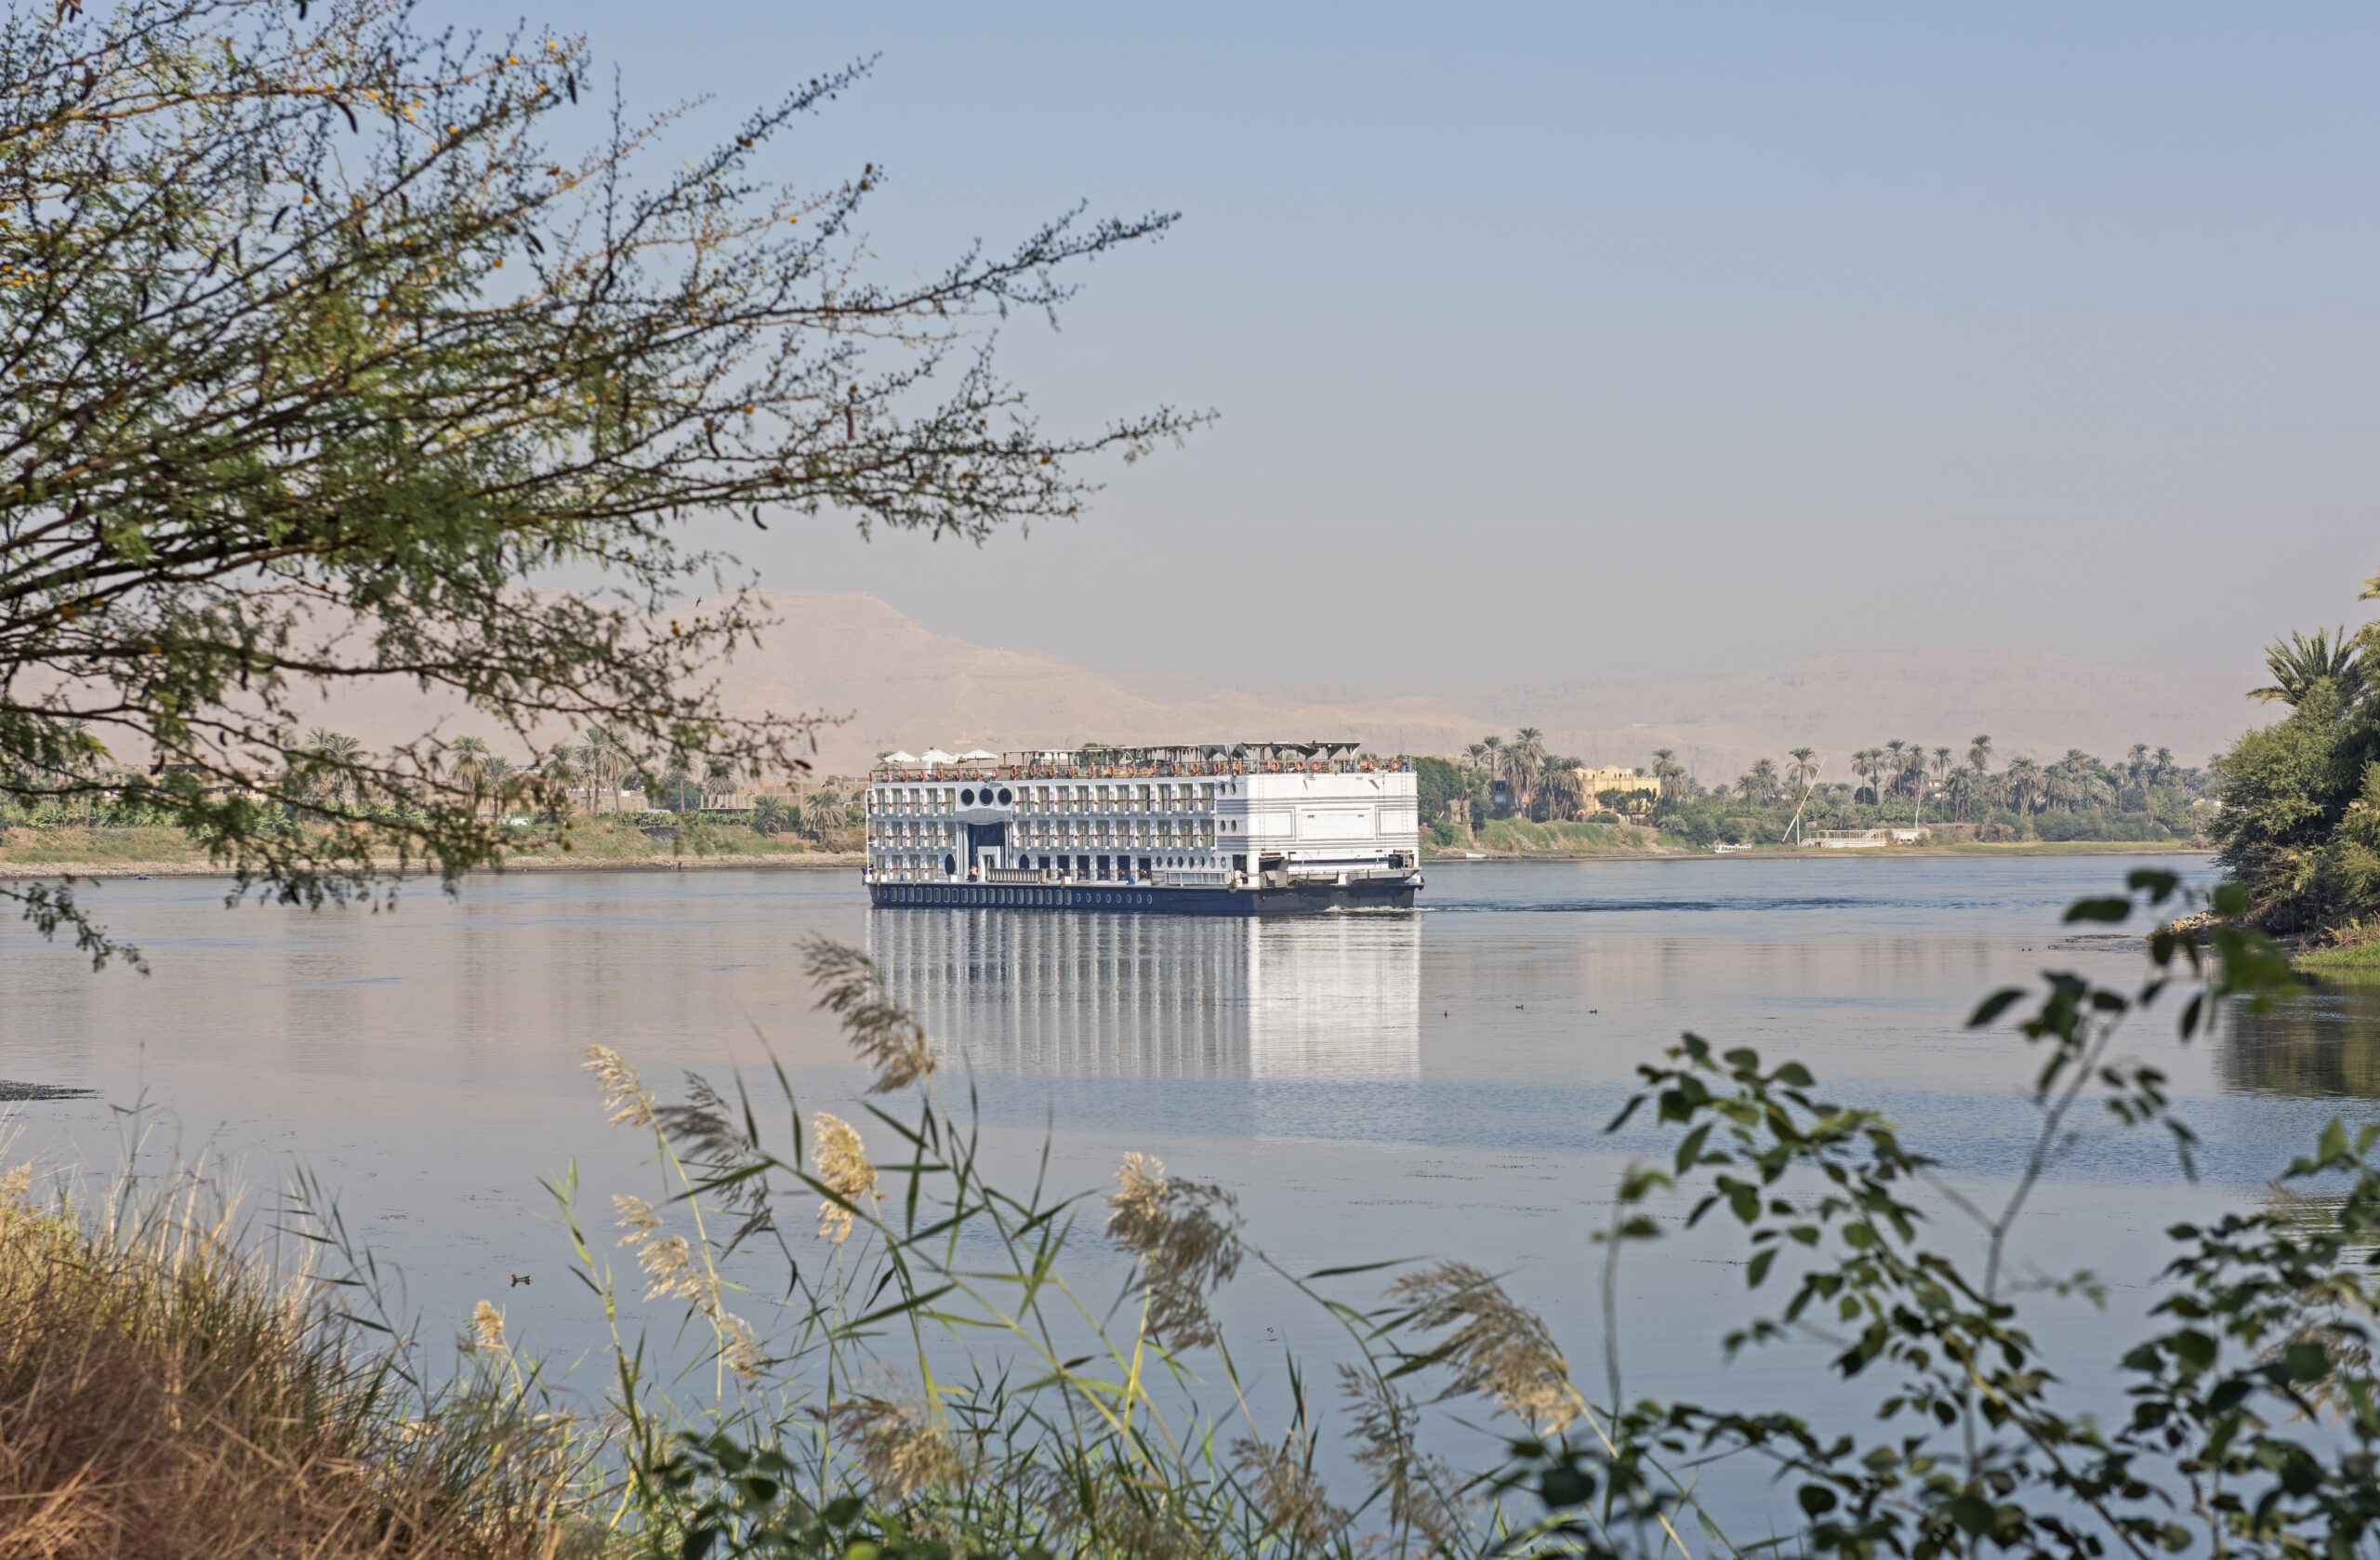 Best Reasons to Take a River Cruise - Egyptian River Cruise Boat on the Nile